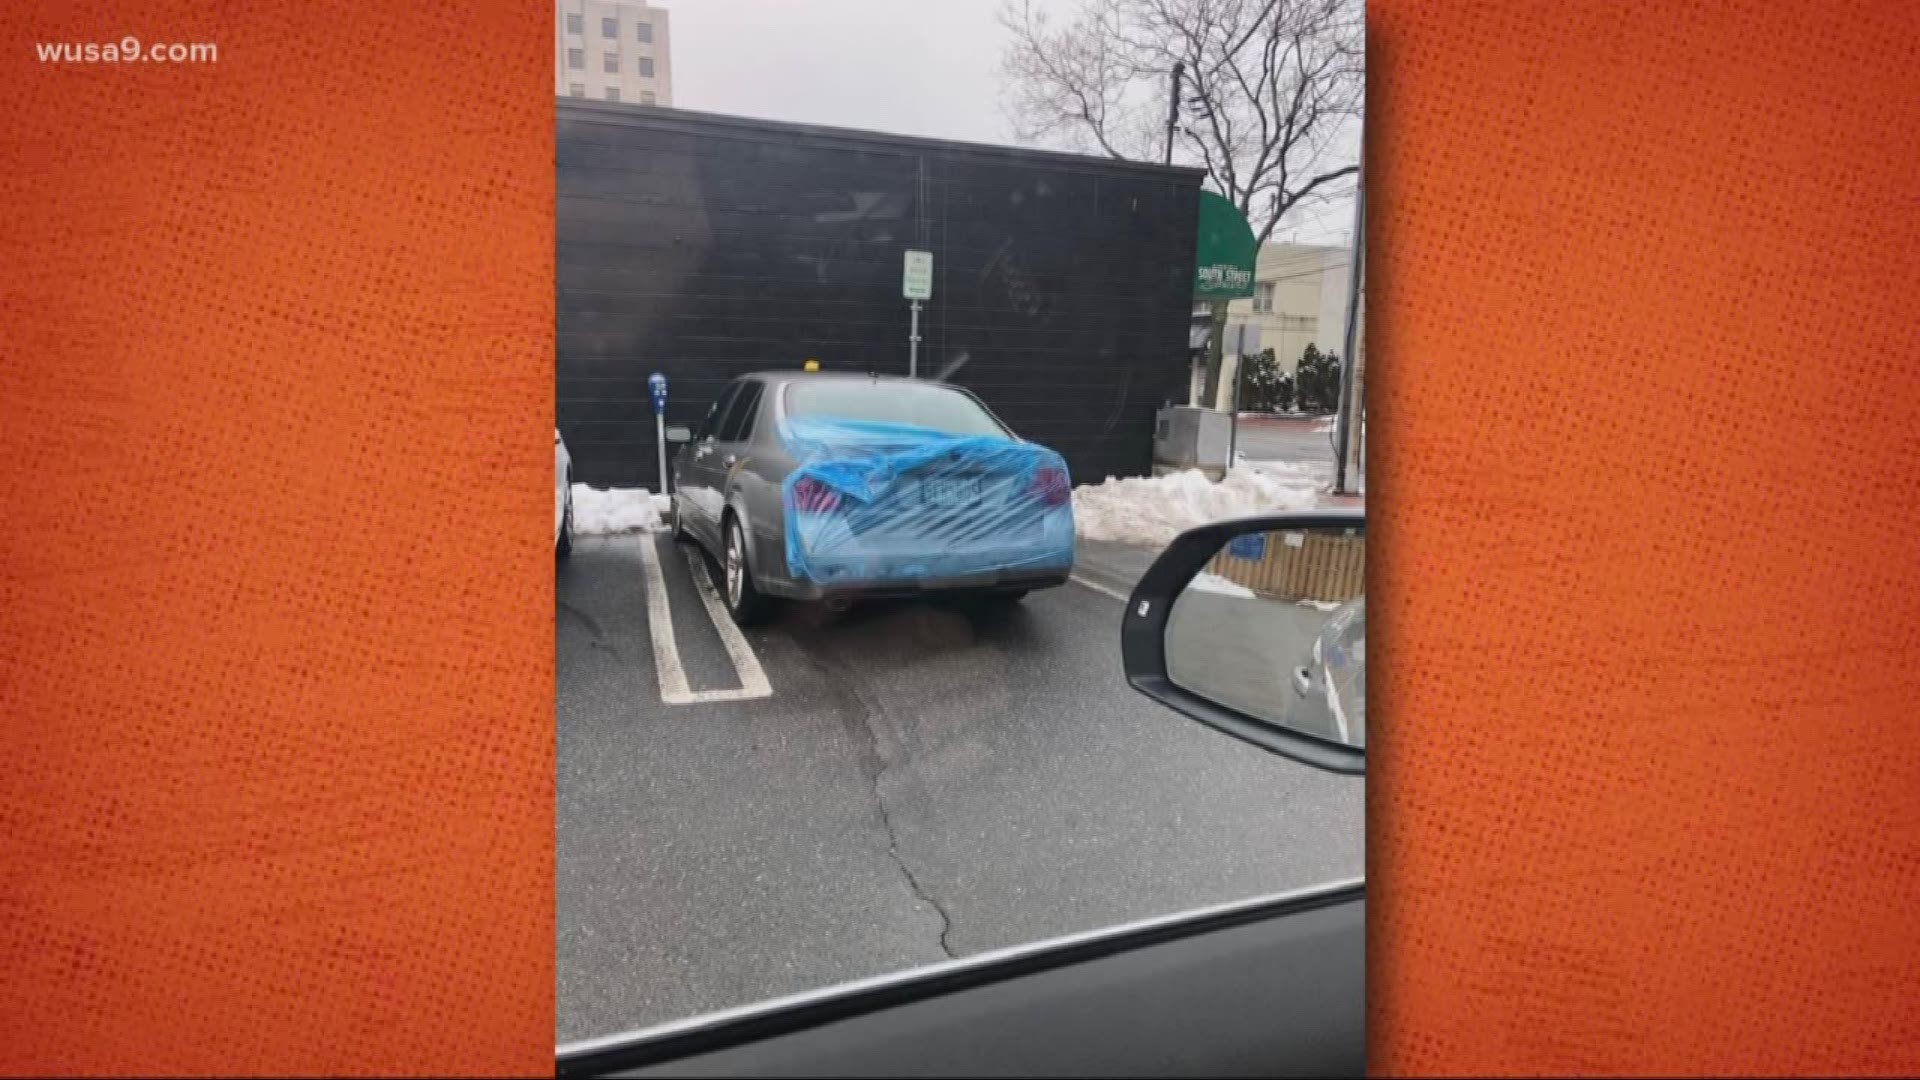 There's plastic covering a car. The obvious question.
What are they trying to protect? The license plate? Maybe they didn't pay meter.